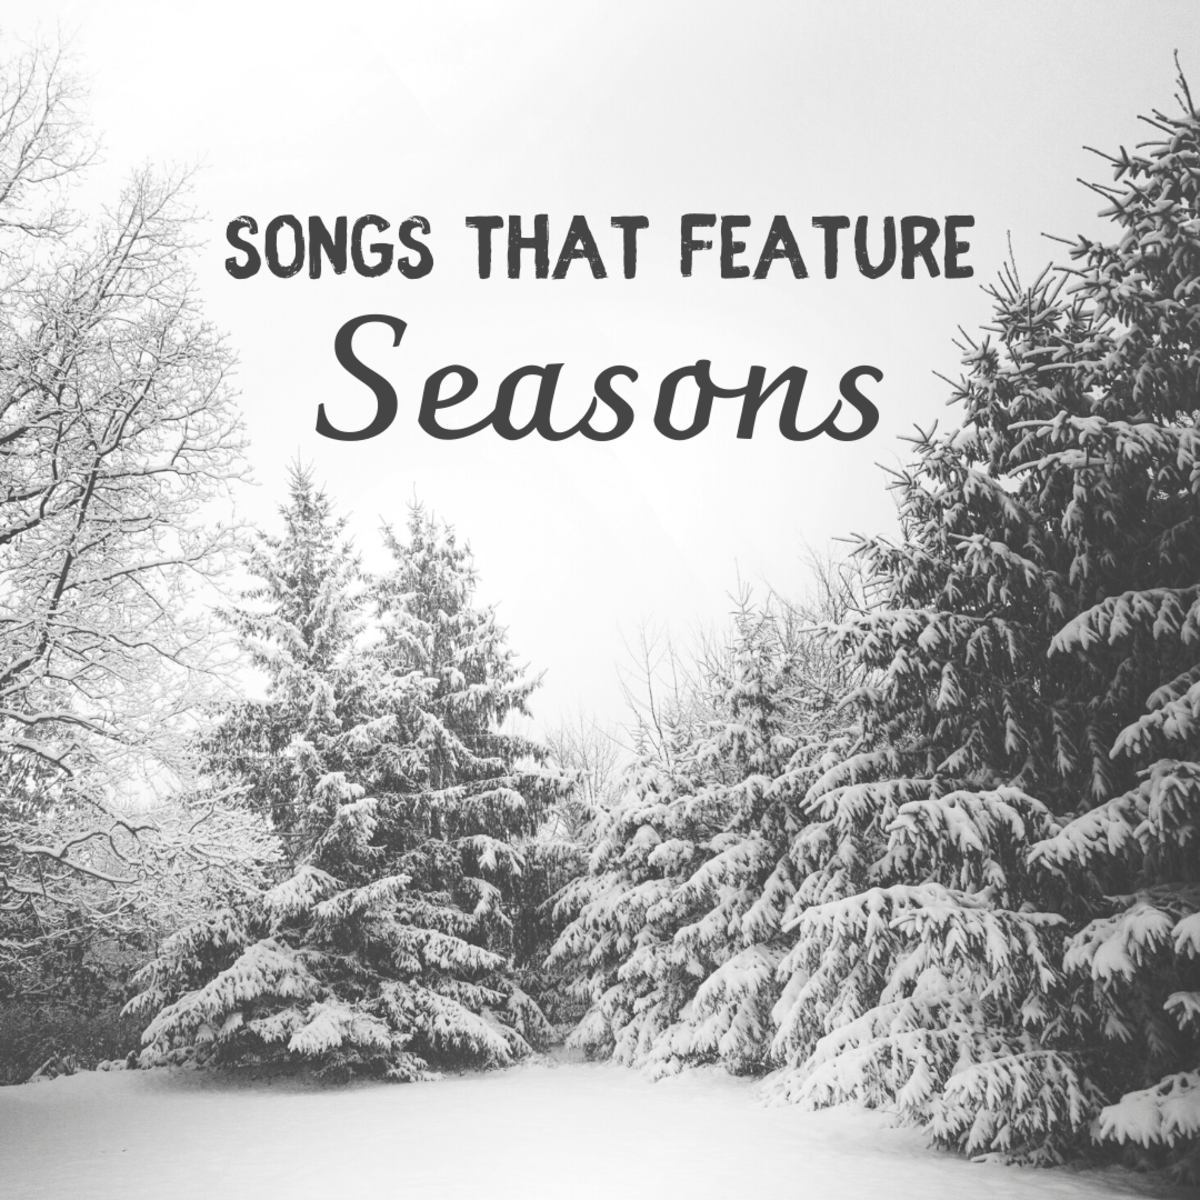 Spring, summer, autumn, and winter—celebrate the seasons with this awesome playlist.